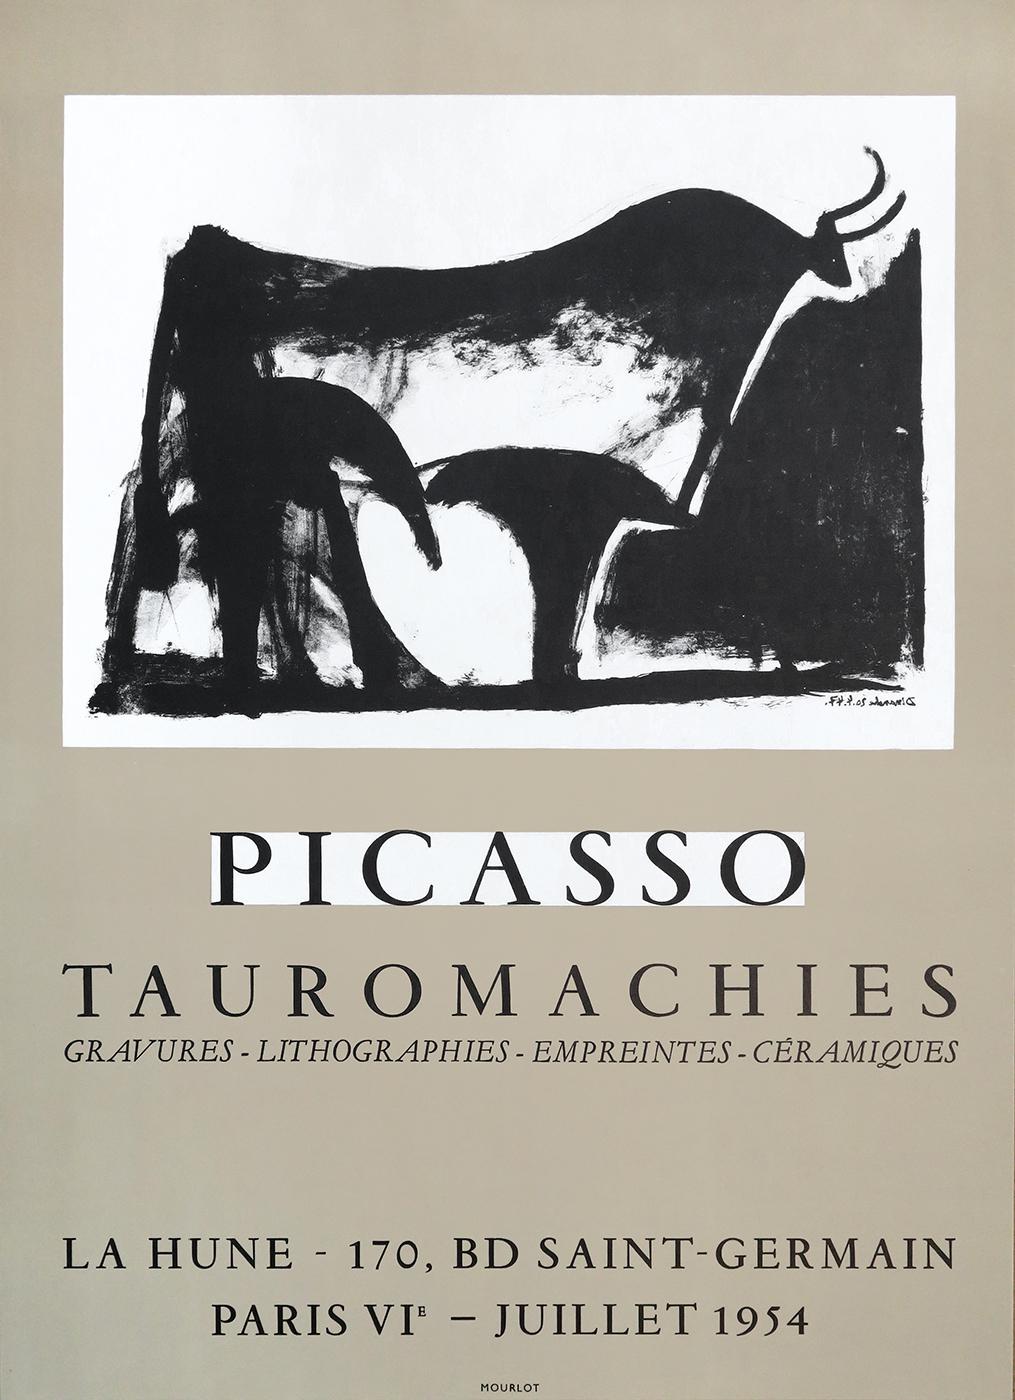 Other Pablo Picasso, ‘Tauromachies' at La Hune, 1954 For Sale